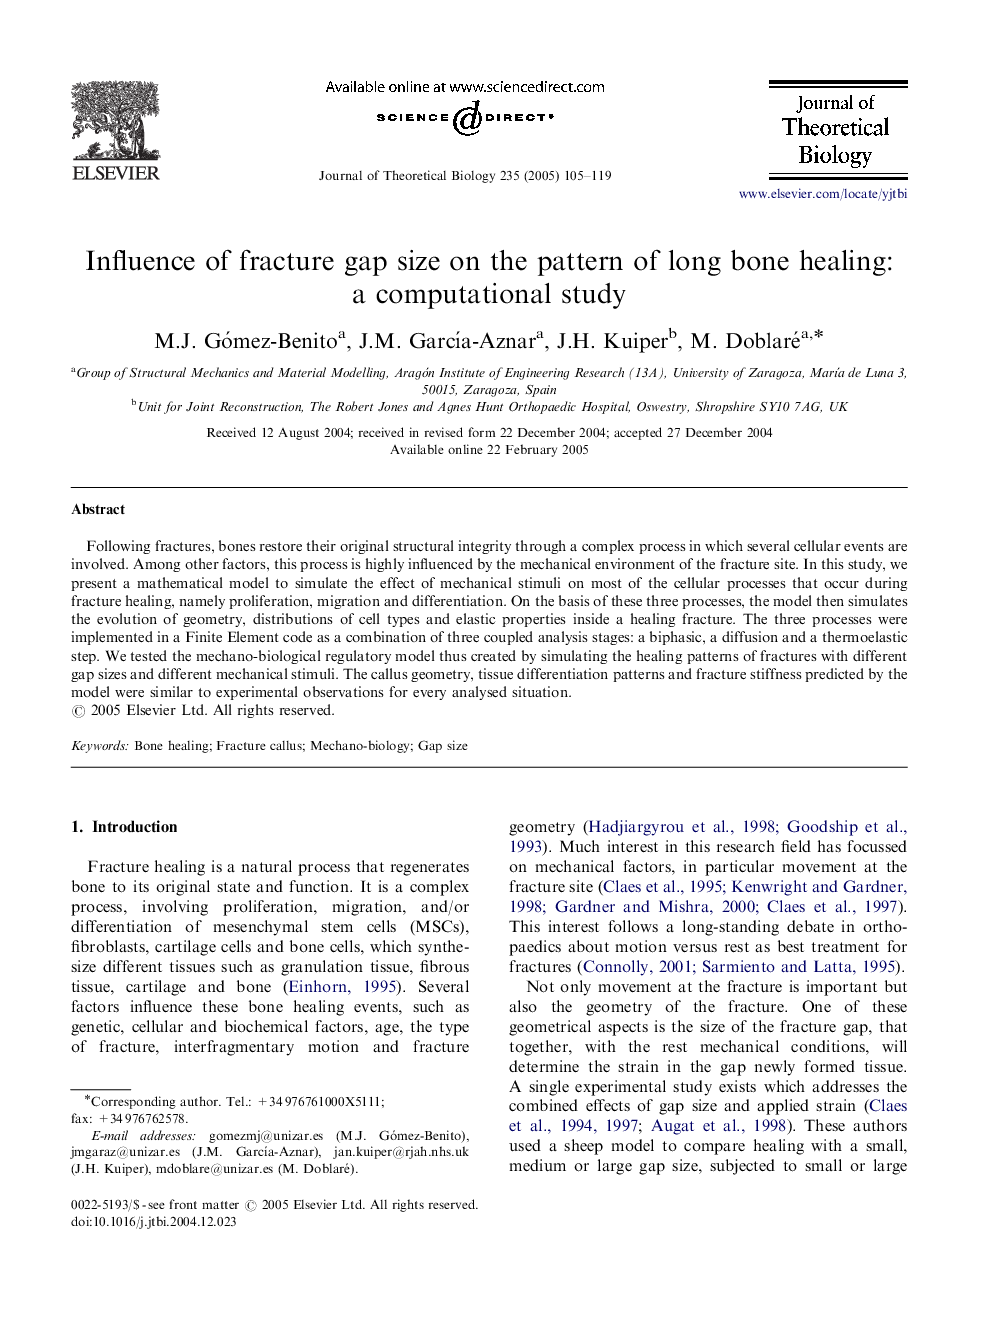 Influence of fracture gap size on the pattern of long bone healing: a computational study